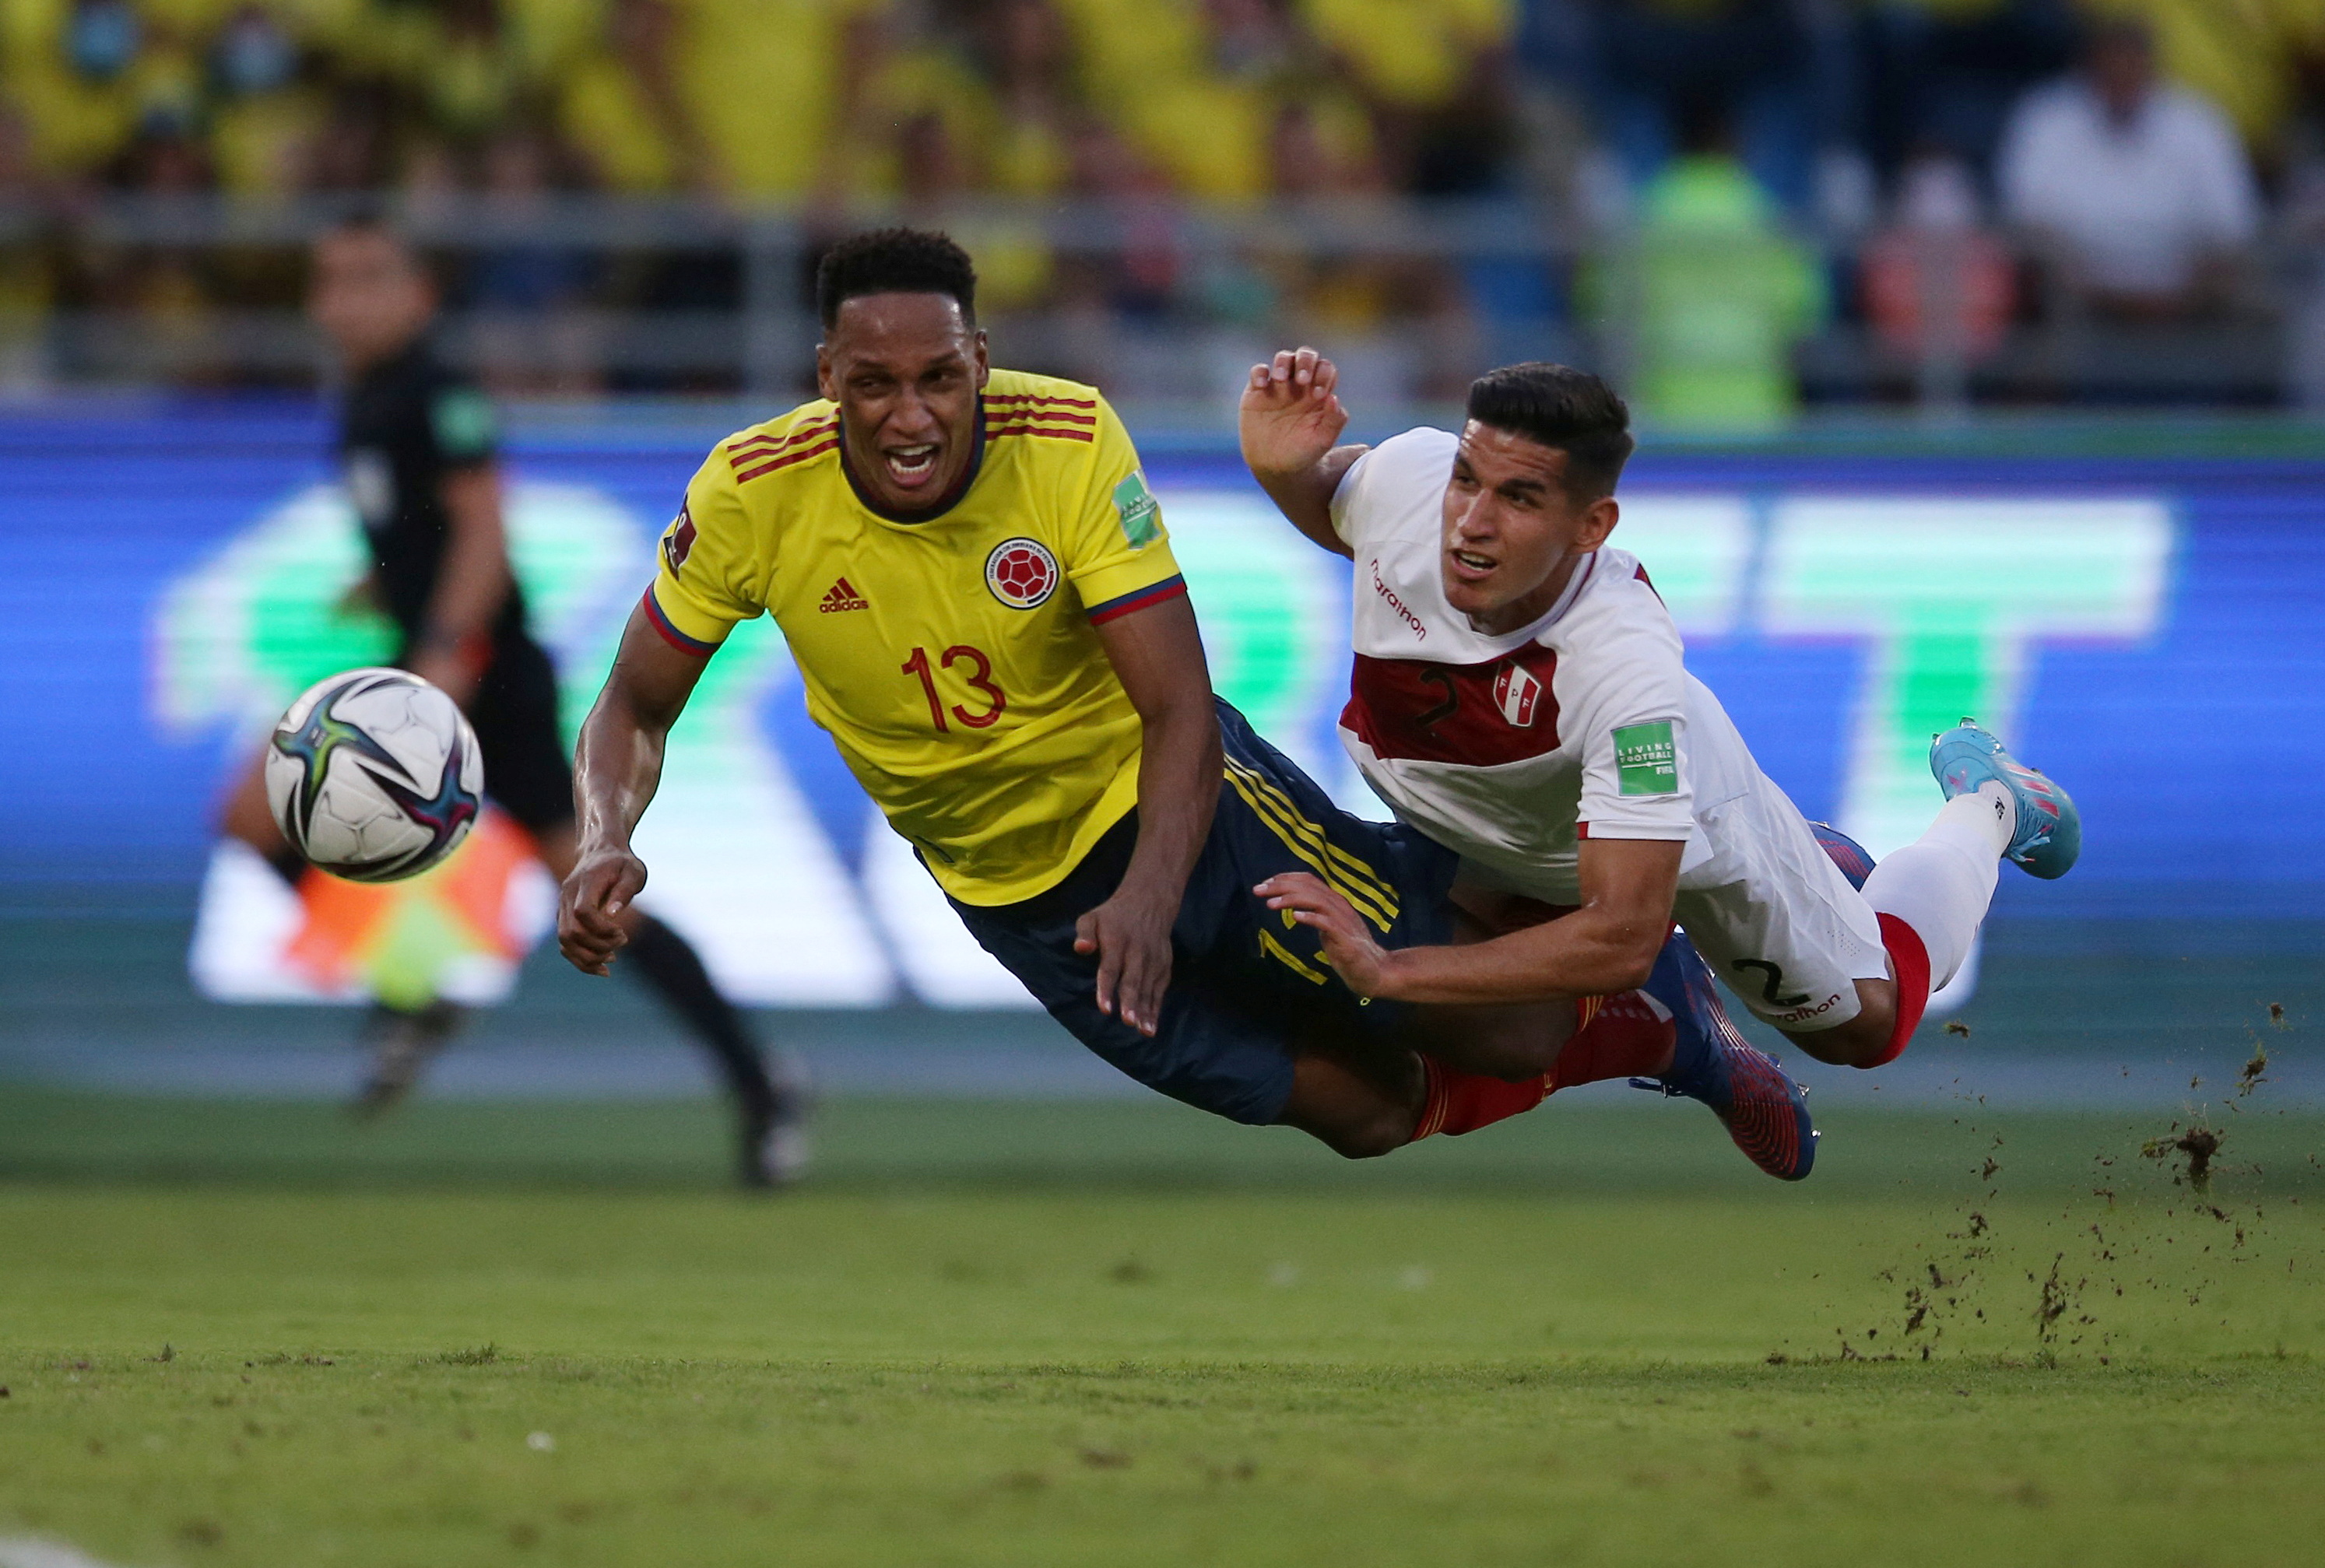 Soccer Football - World Cup - South American Qualifiers - Colombia v Peru - Estadio Metropolitano Roberto Melendez, Barranquilla, Colombia - January 28, 2022 Colombia's Yerry Mina in action with Peru's Luis Abram REUTERS/Luisa Gonzalez